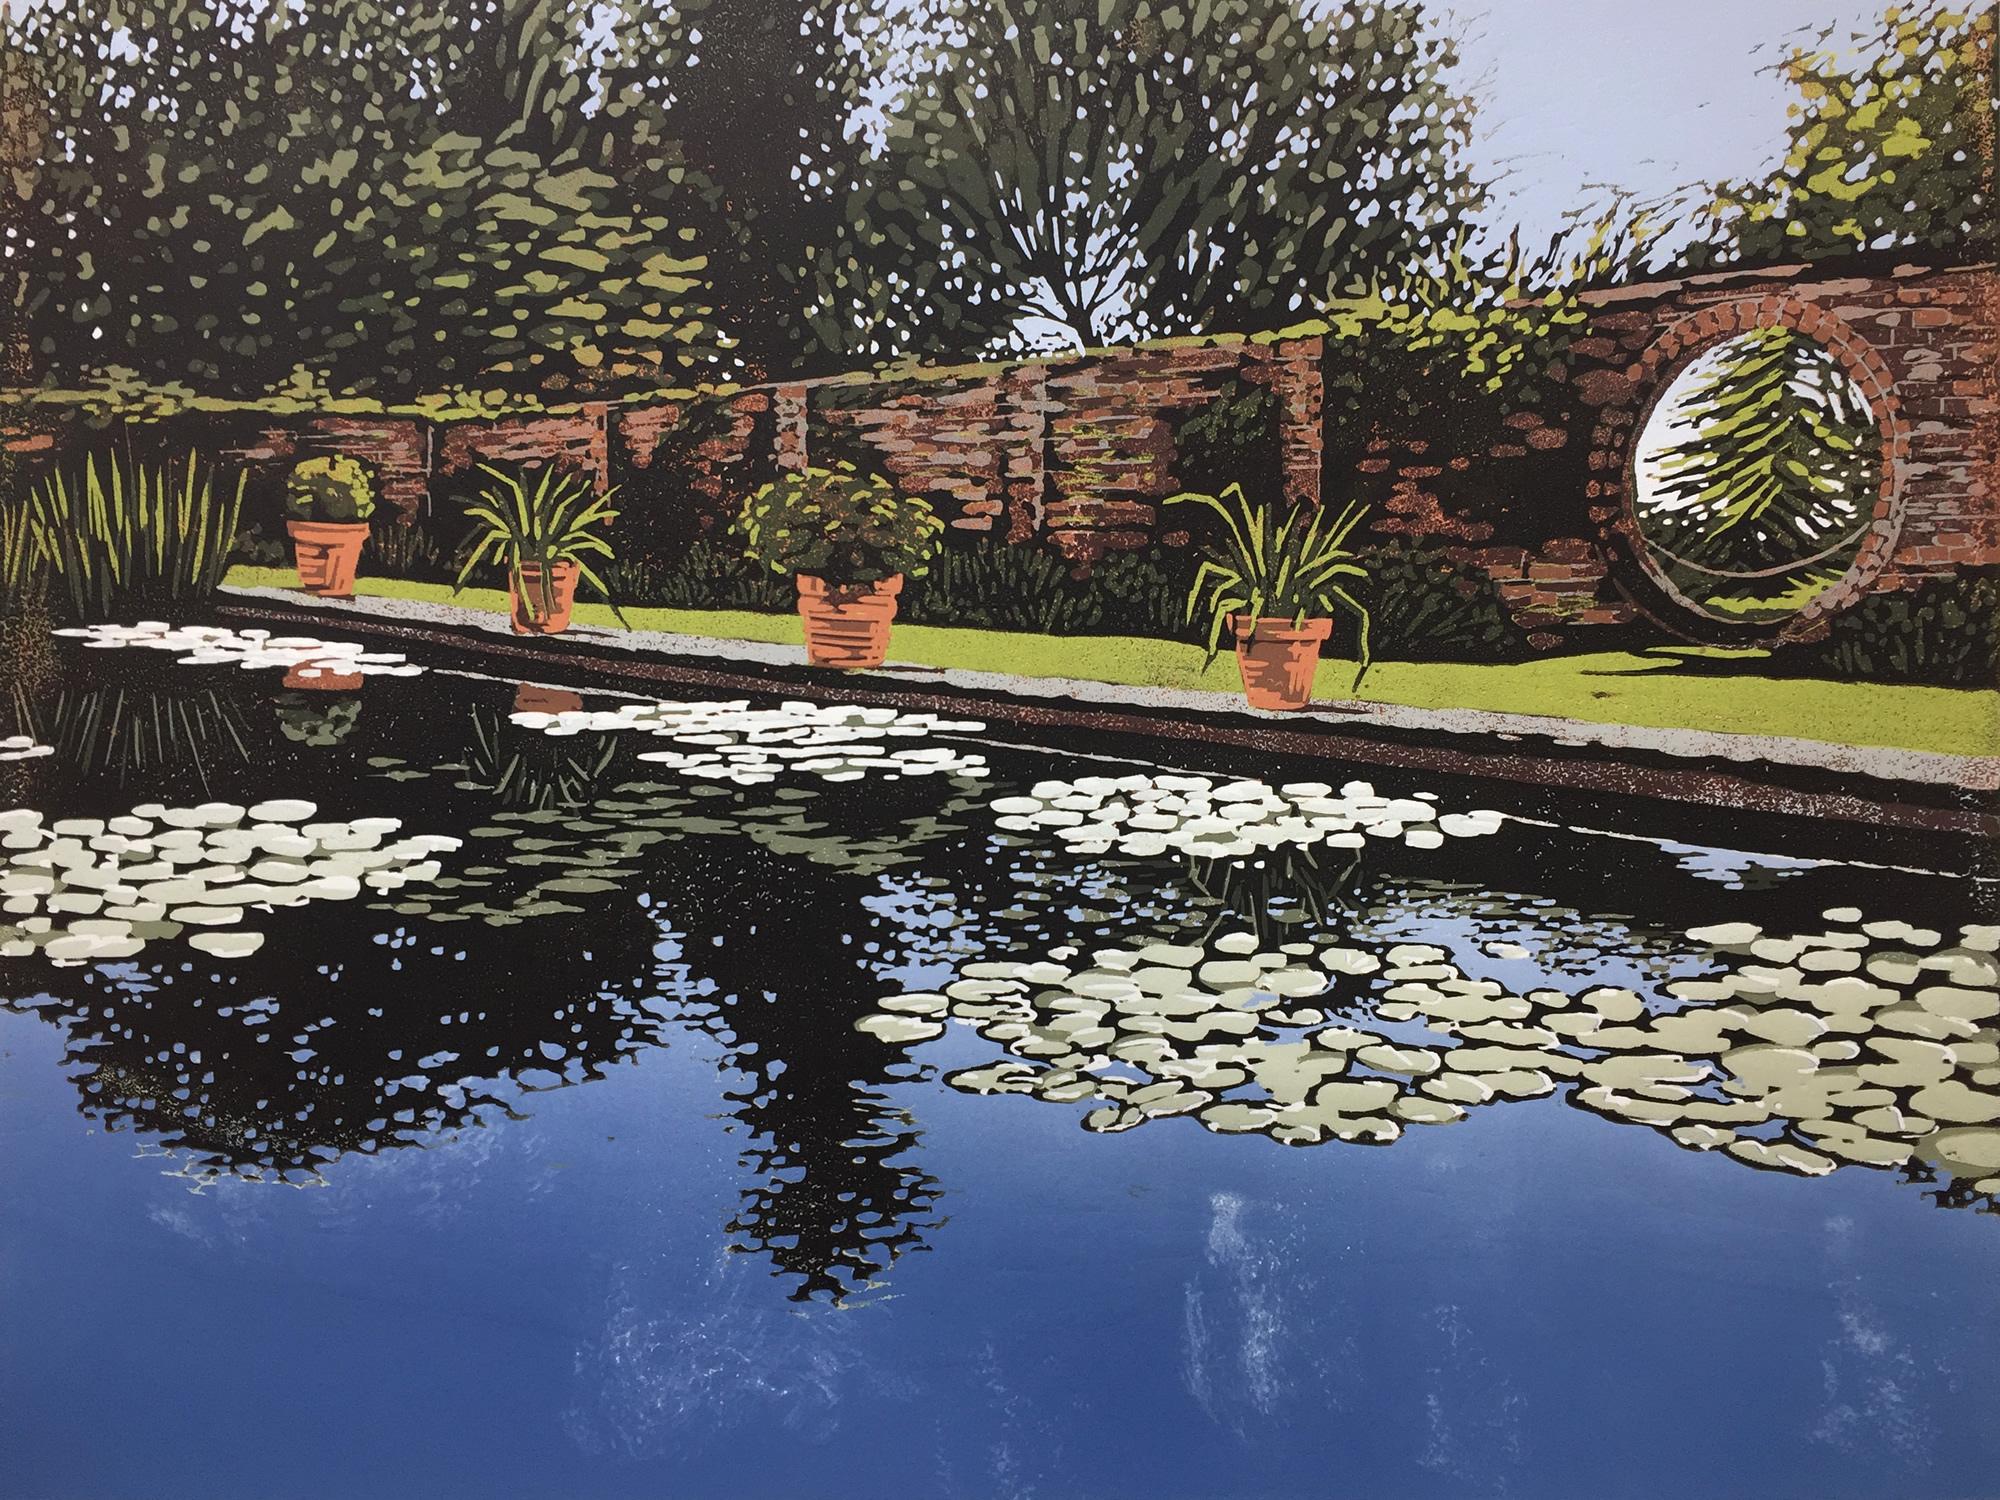 Claydon Pond Reflections by Alexandra Buckle 
Limited edition print and hand signed by the artist
Image size: H:30cm x W:40cm 
Complete size of unframed work: H:40cm x W:50cm x D:0.1cm 
Please note that insitu images are purely an indication of how